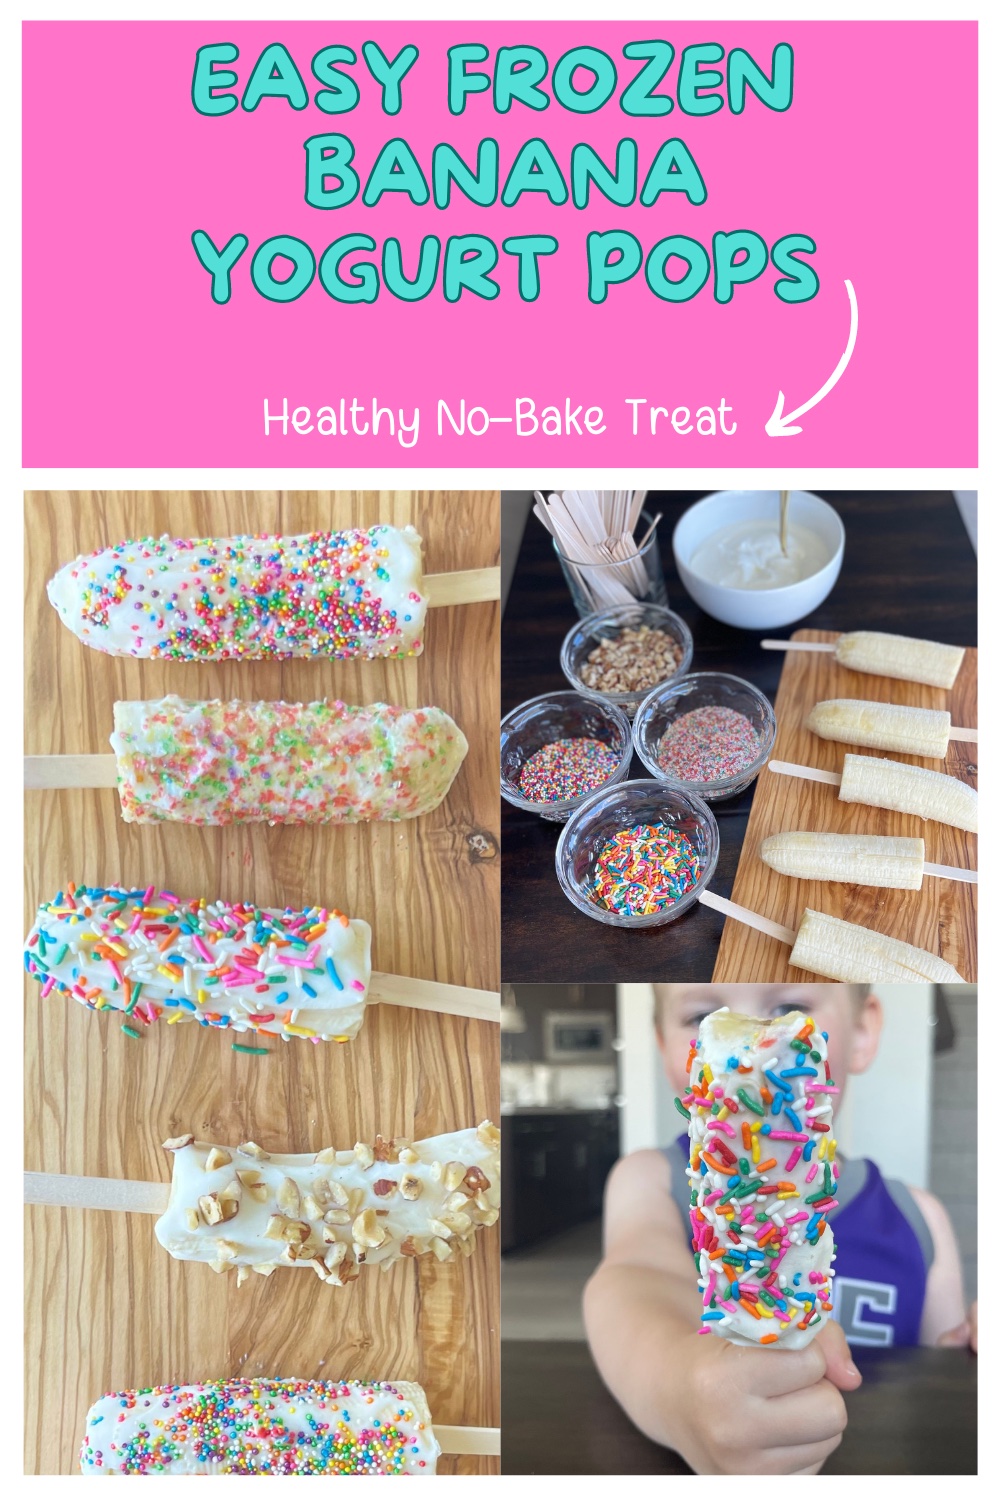 Deliciously fun, and a family-favorite these healthy snack ideas are great for kids and parents alike. No-bake and super easy to make. Great for bbqs kids birthday parties or just hot summer day snack.